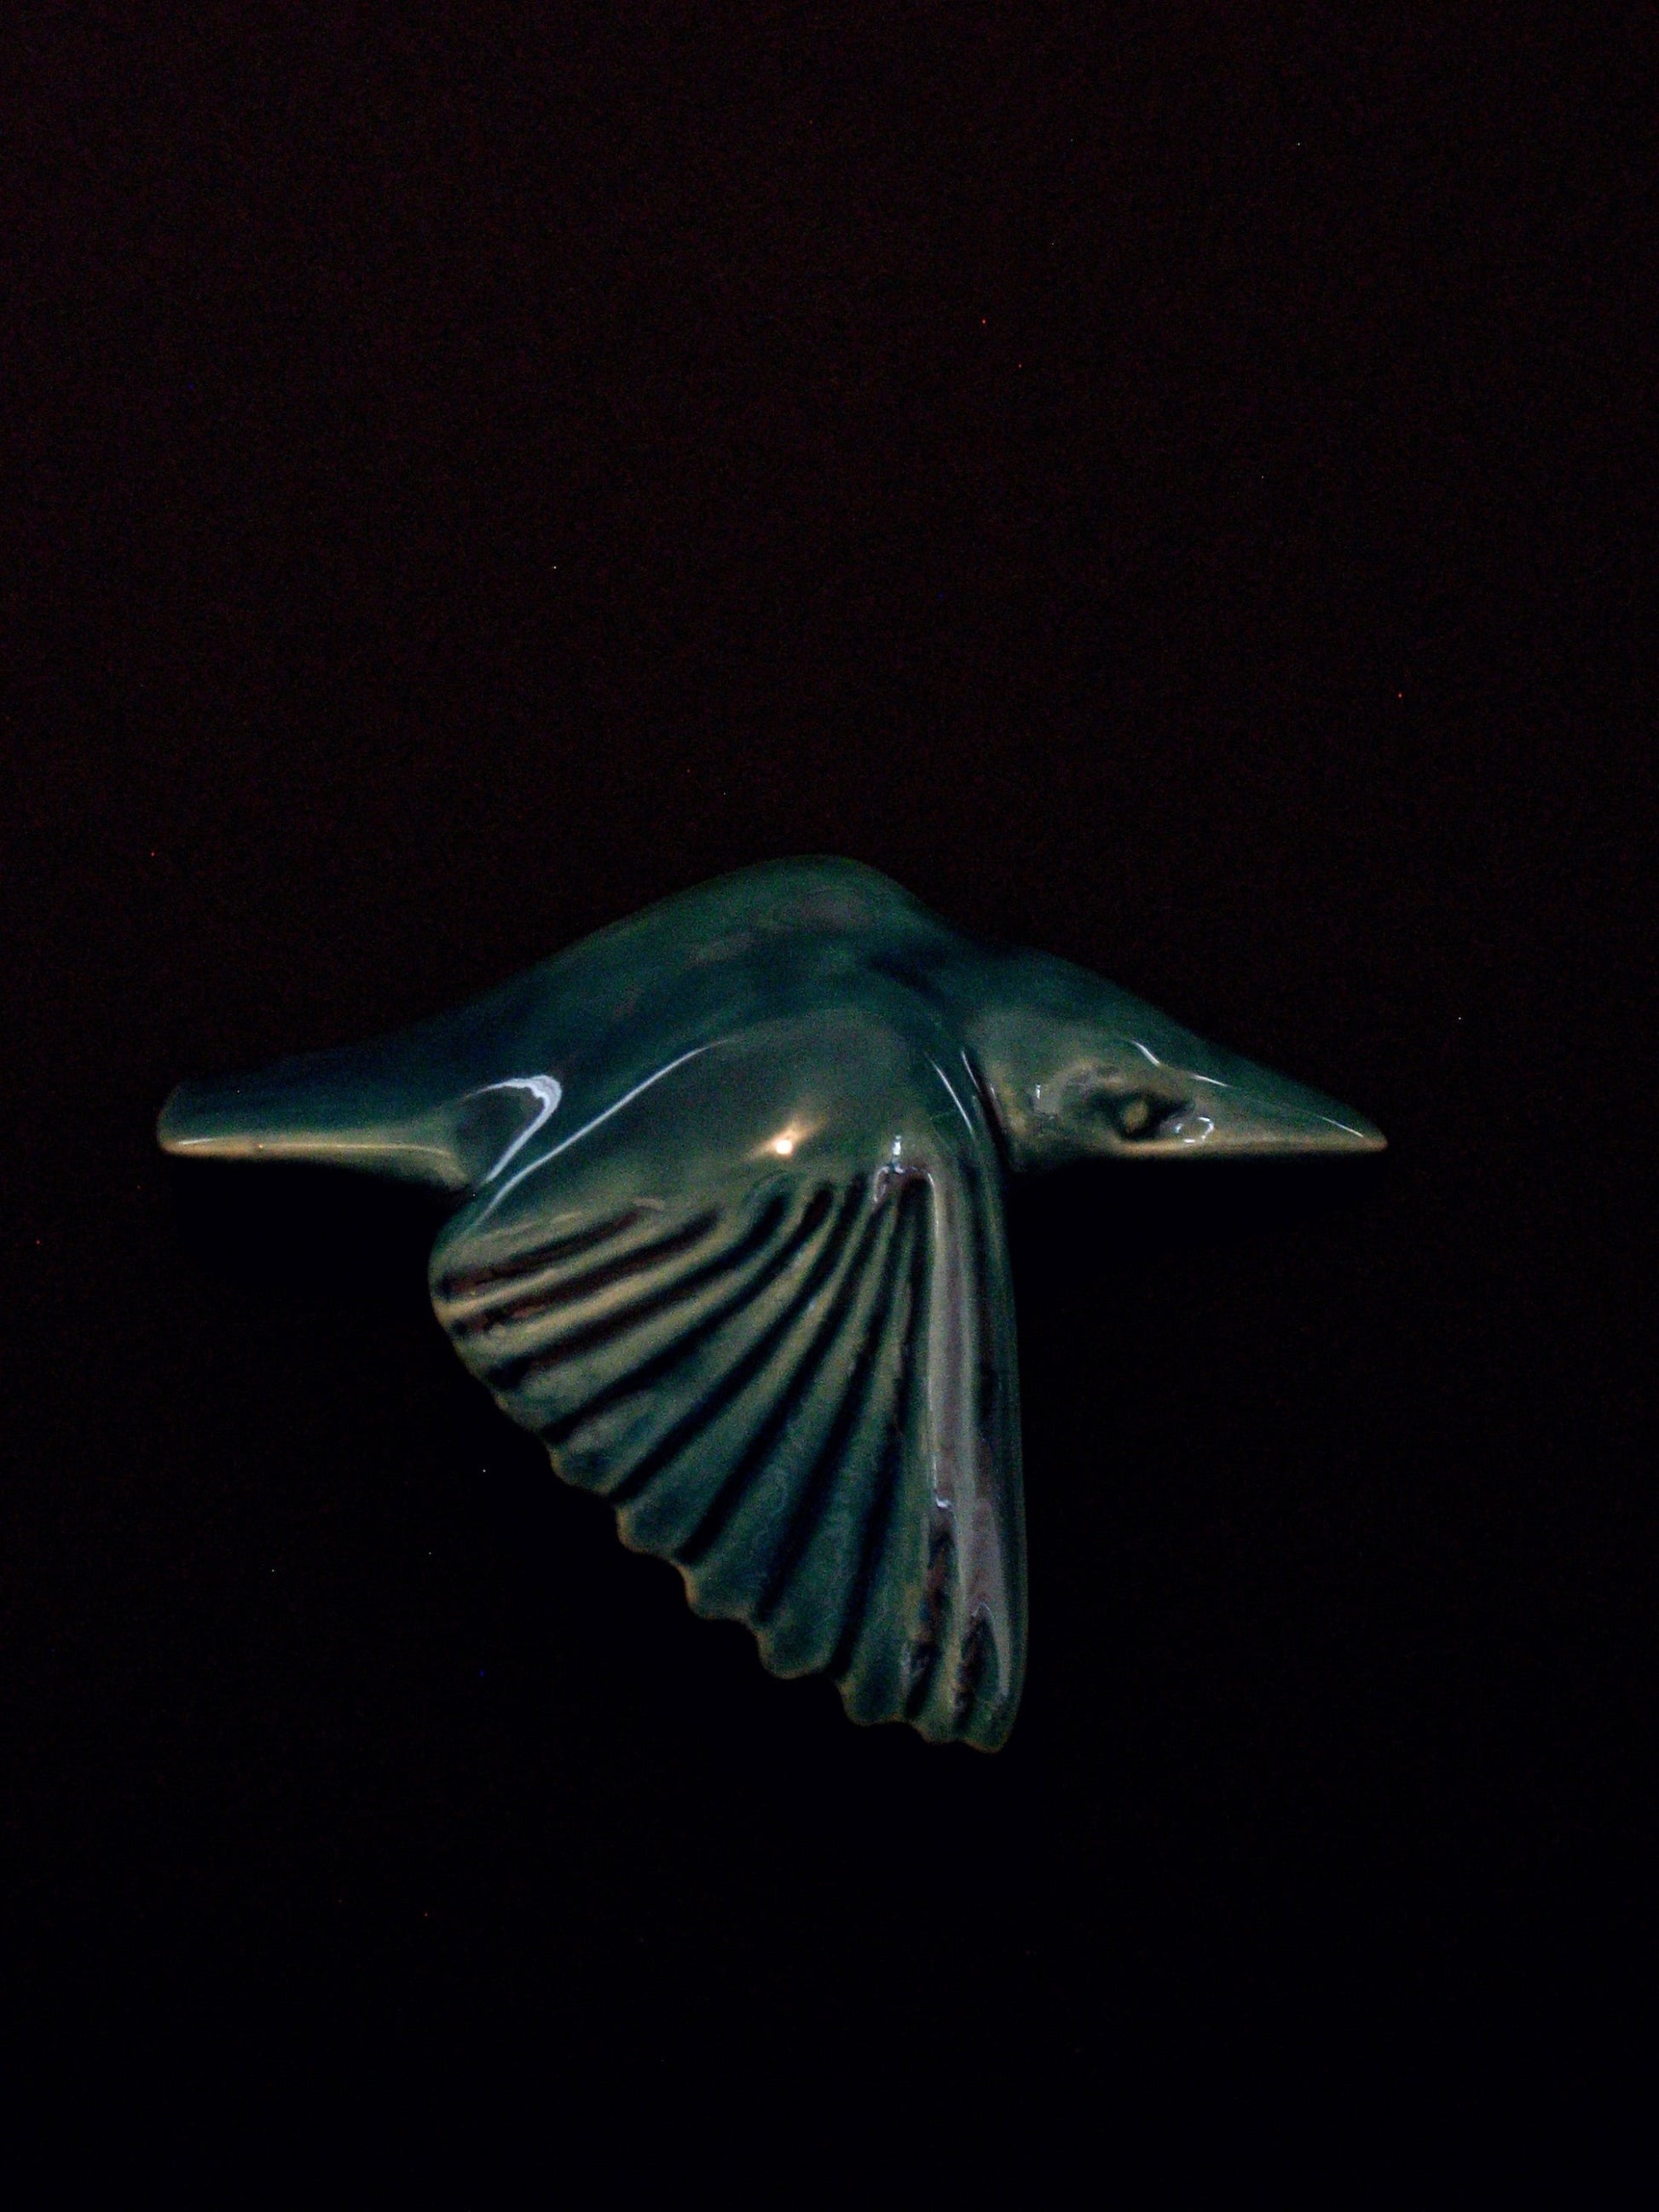 Ceramic Kotare Blue (Kingfisher wings down) by Bob Steiner Silver Fern Gallery